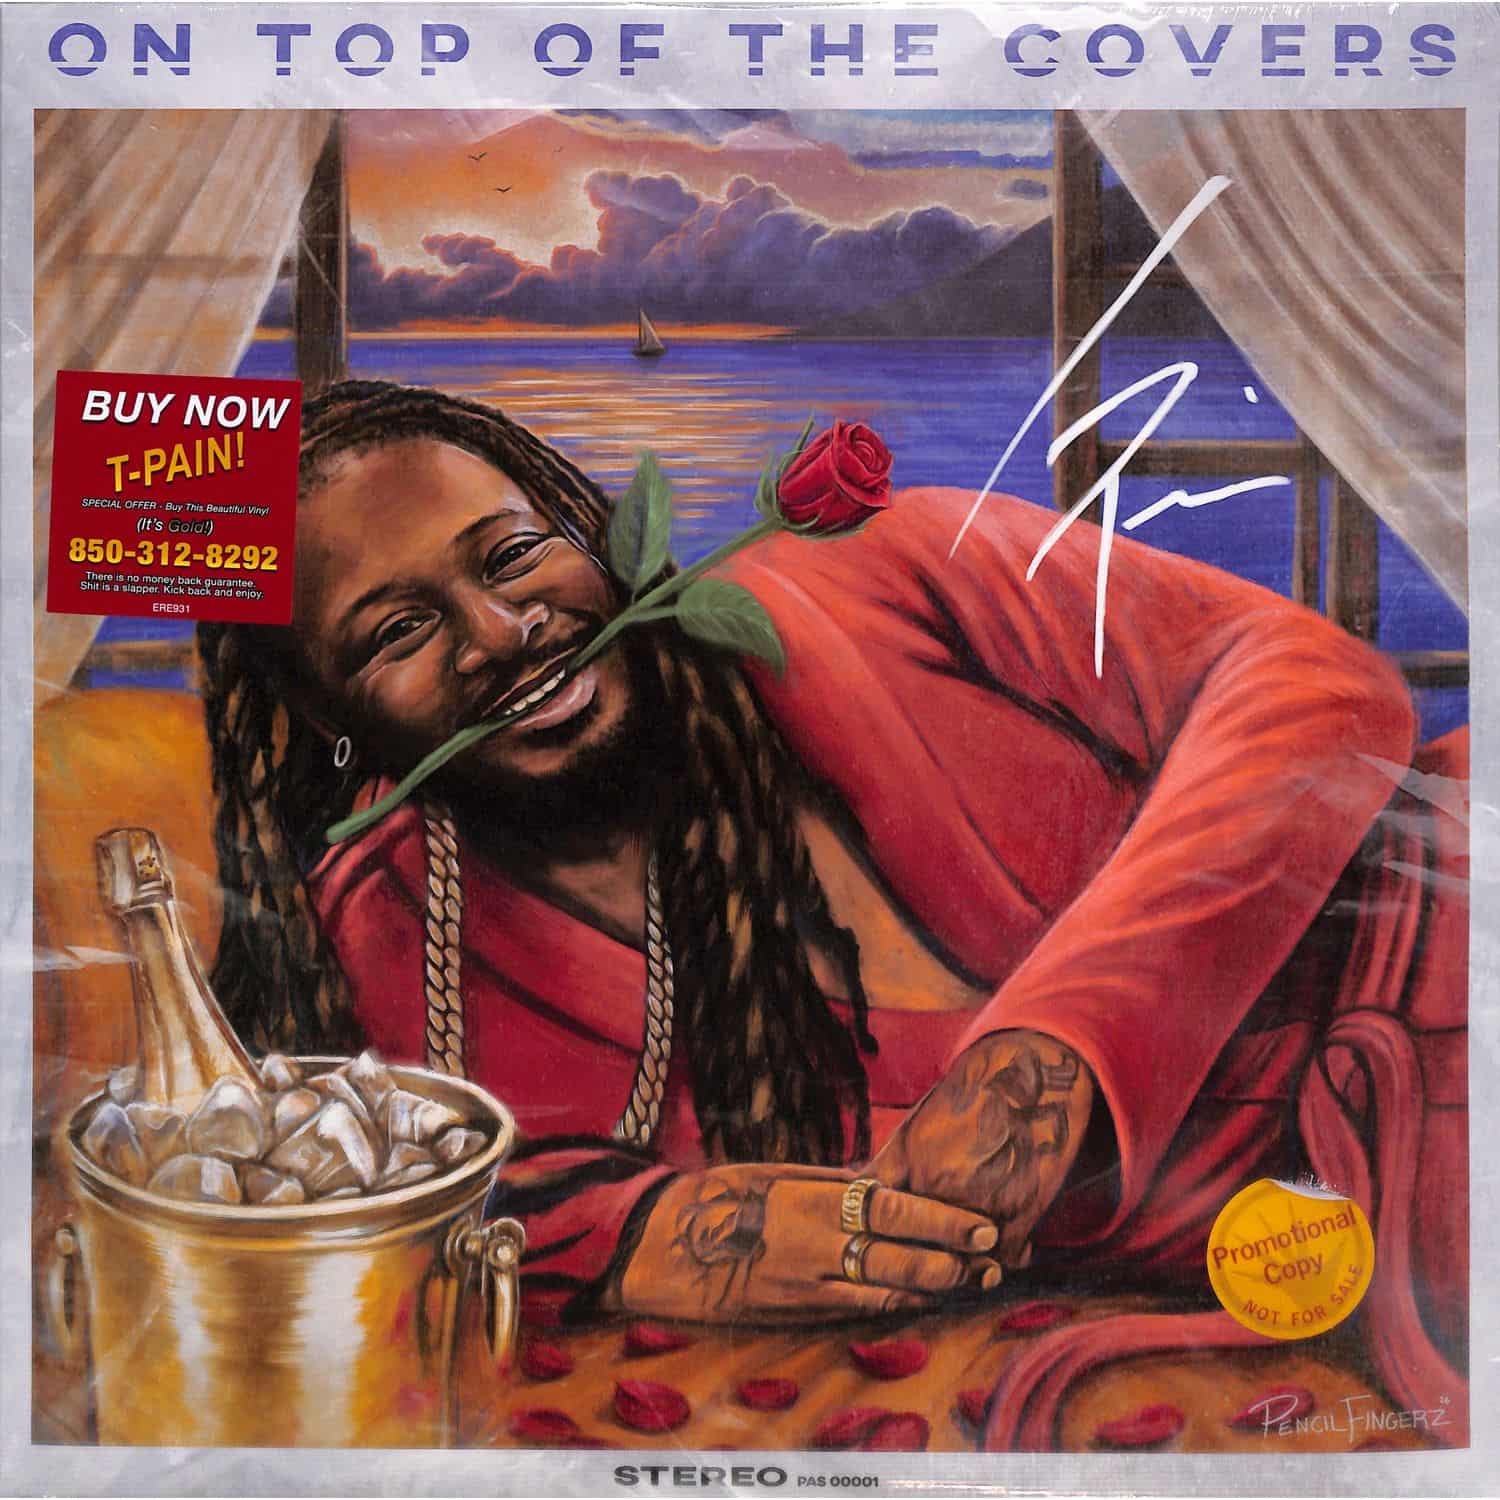 Tpain - ON TOP OF THE COVERS 